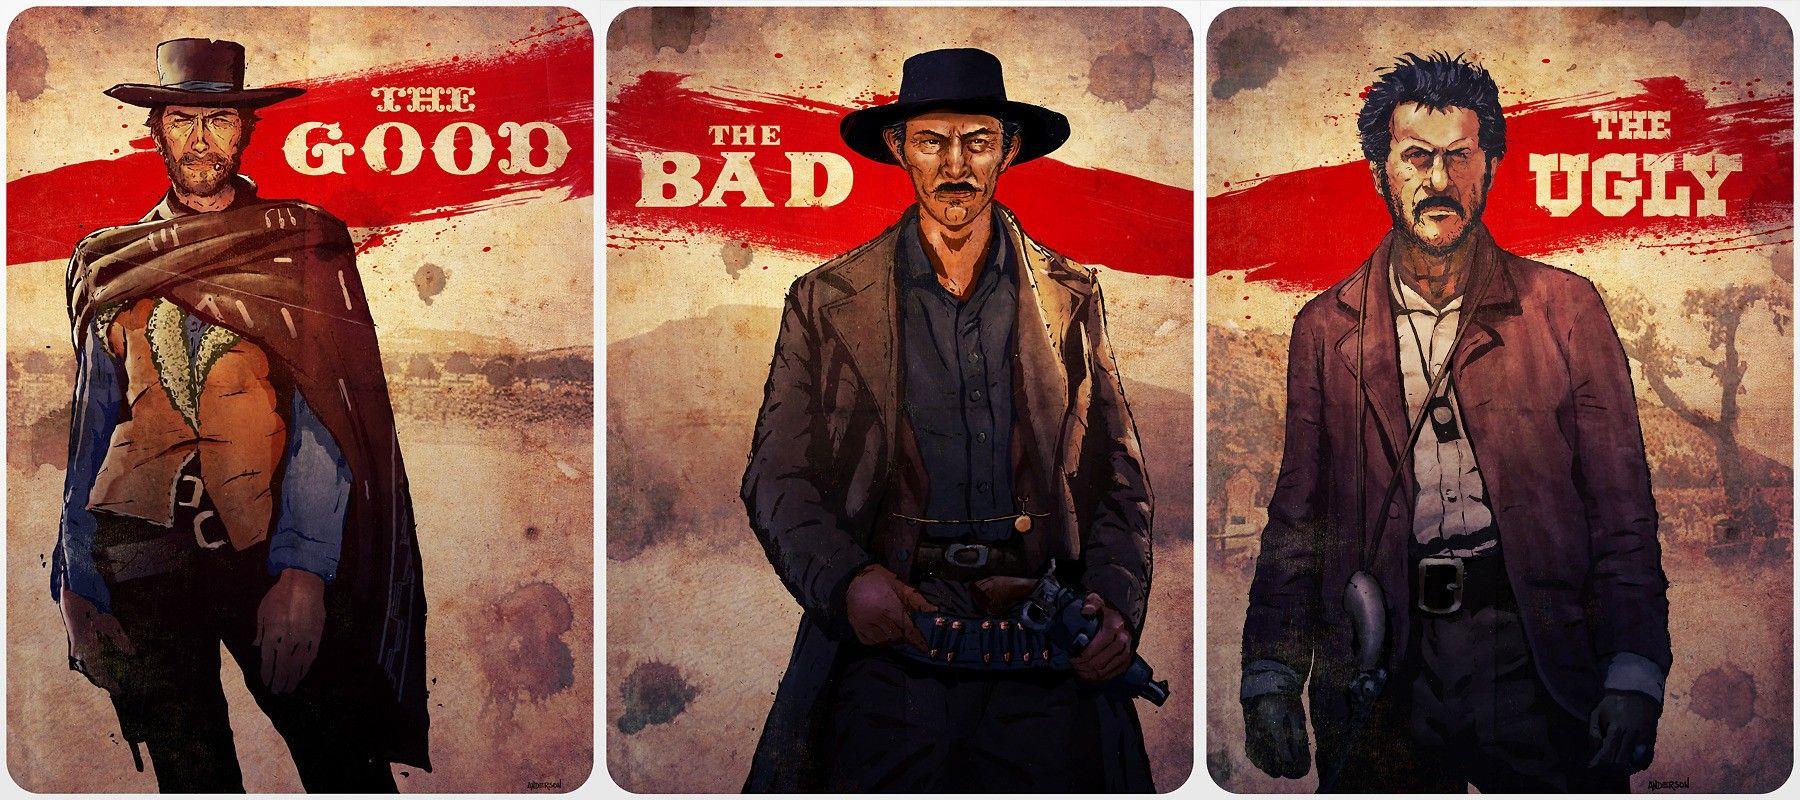 Clint Eastwood, The Good, The Bad and the Ugly Wallpaper HD